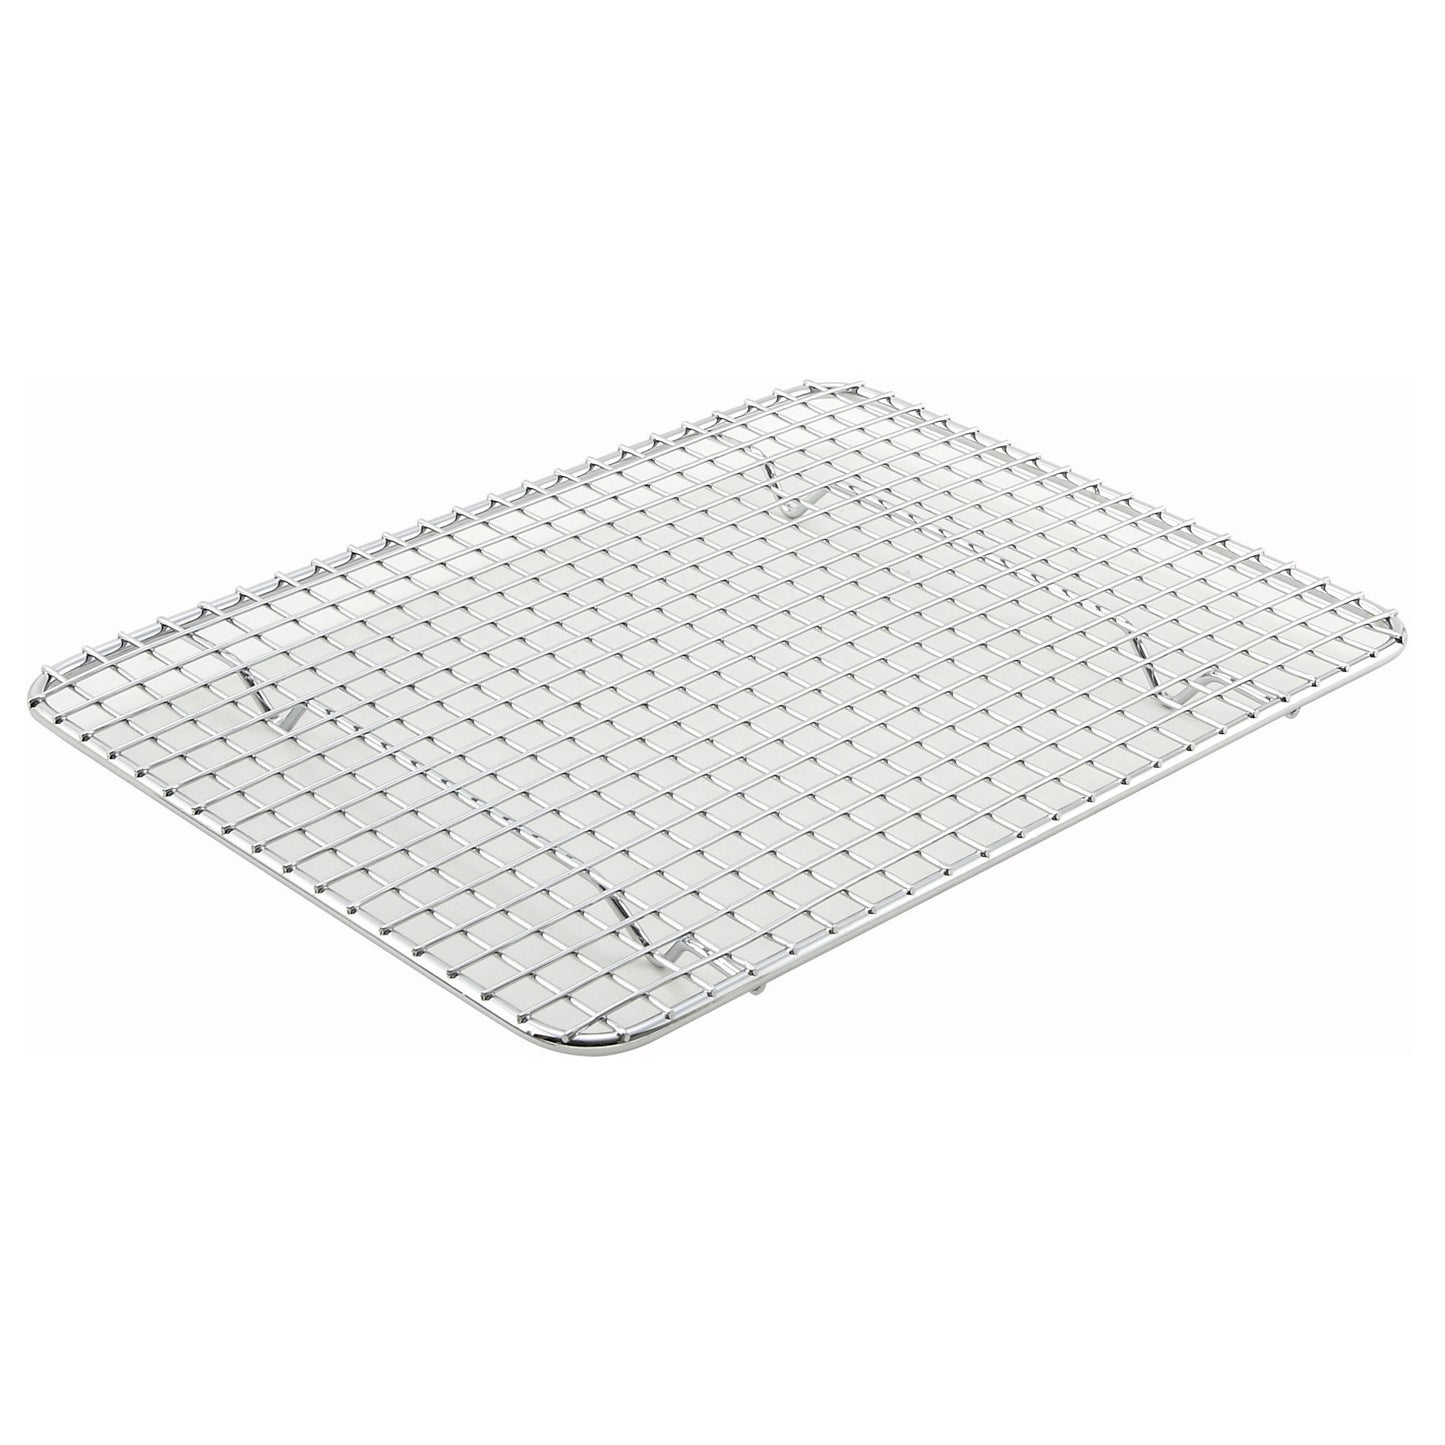 PGW-810 - Pan Grate for Steam Pan, Chrome-Plated - Half (1/2)